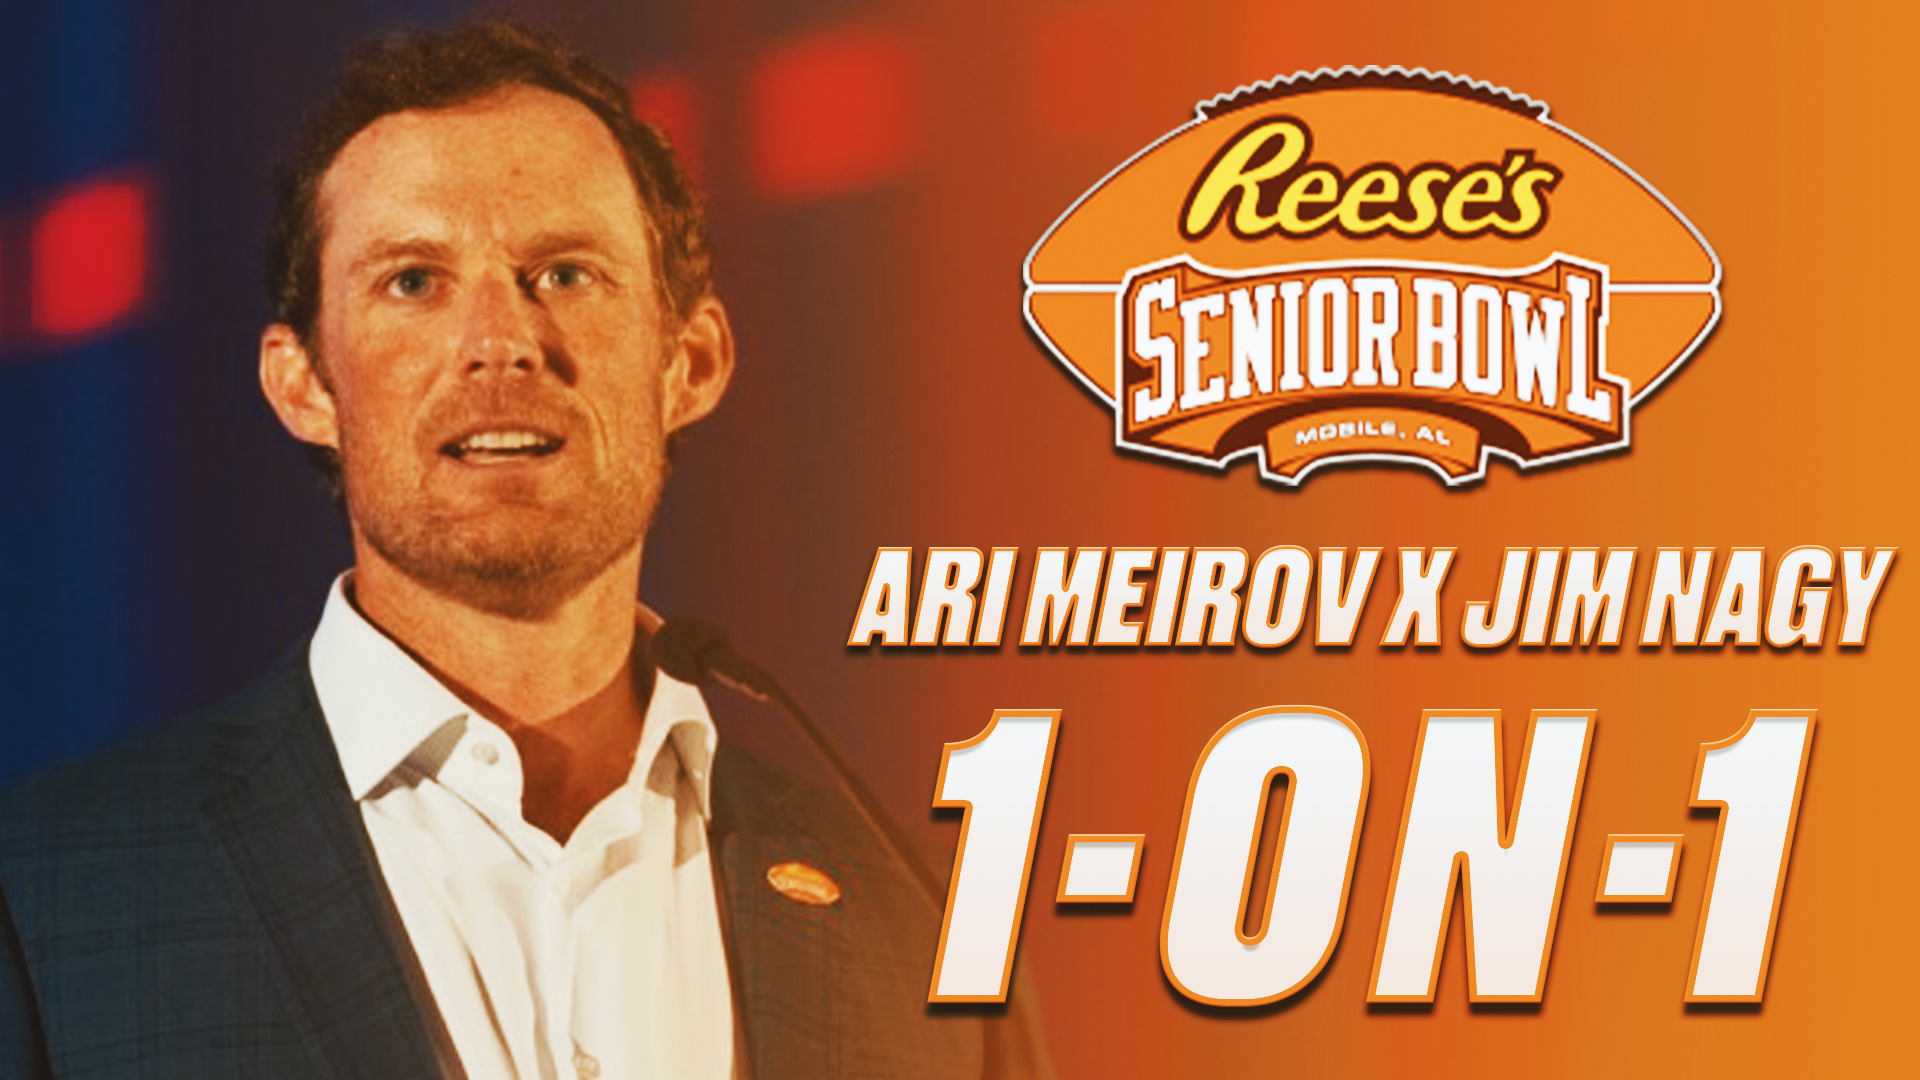 Reese's Senior Bowl Preview with Jim Nagy